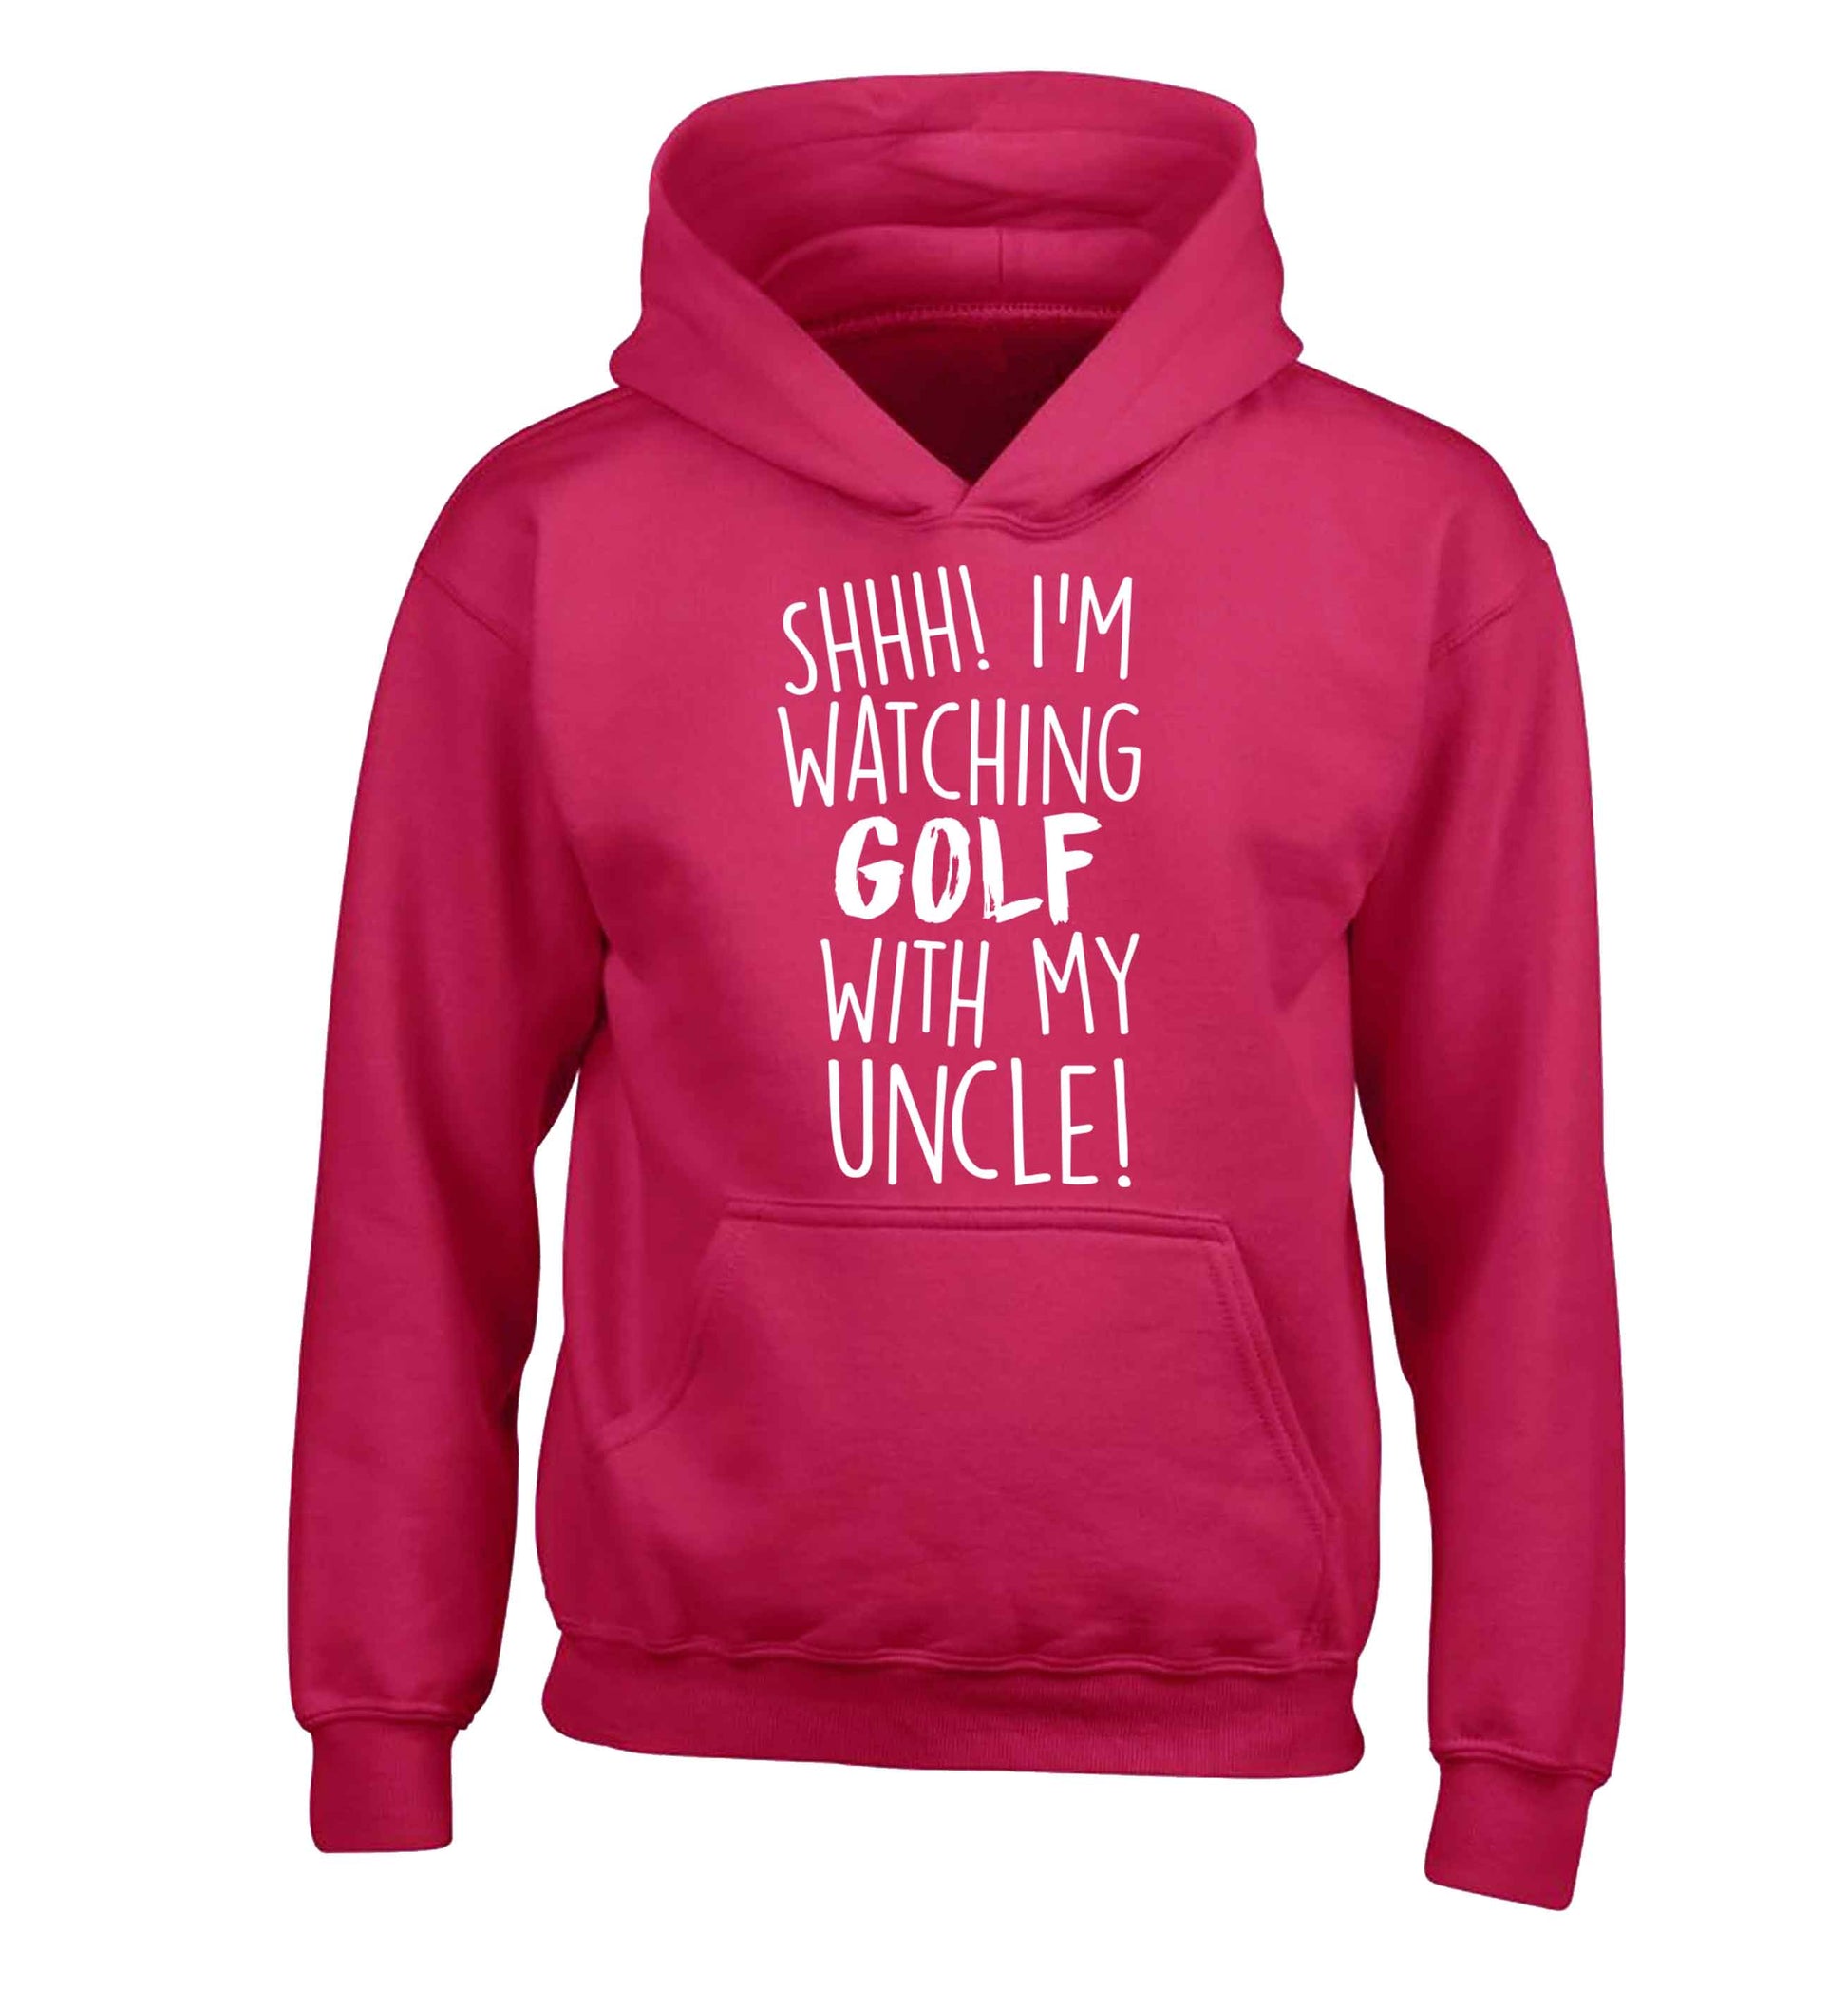 Shh I'm watching golf with my uncle children's pink hoodie 12-13 Years